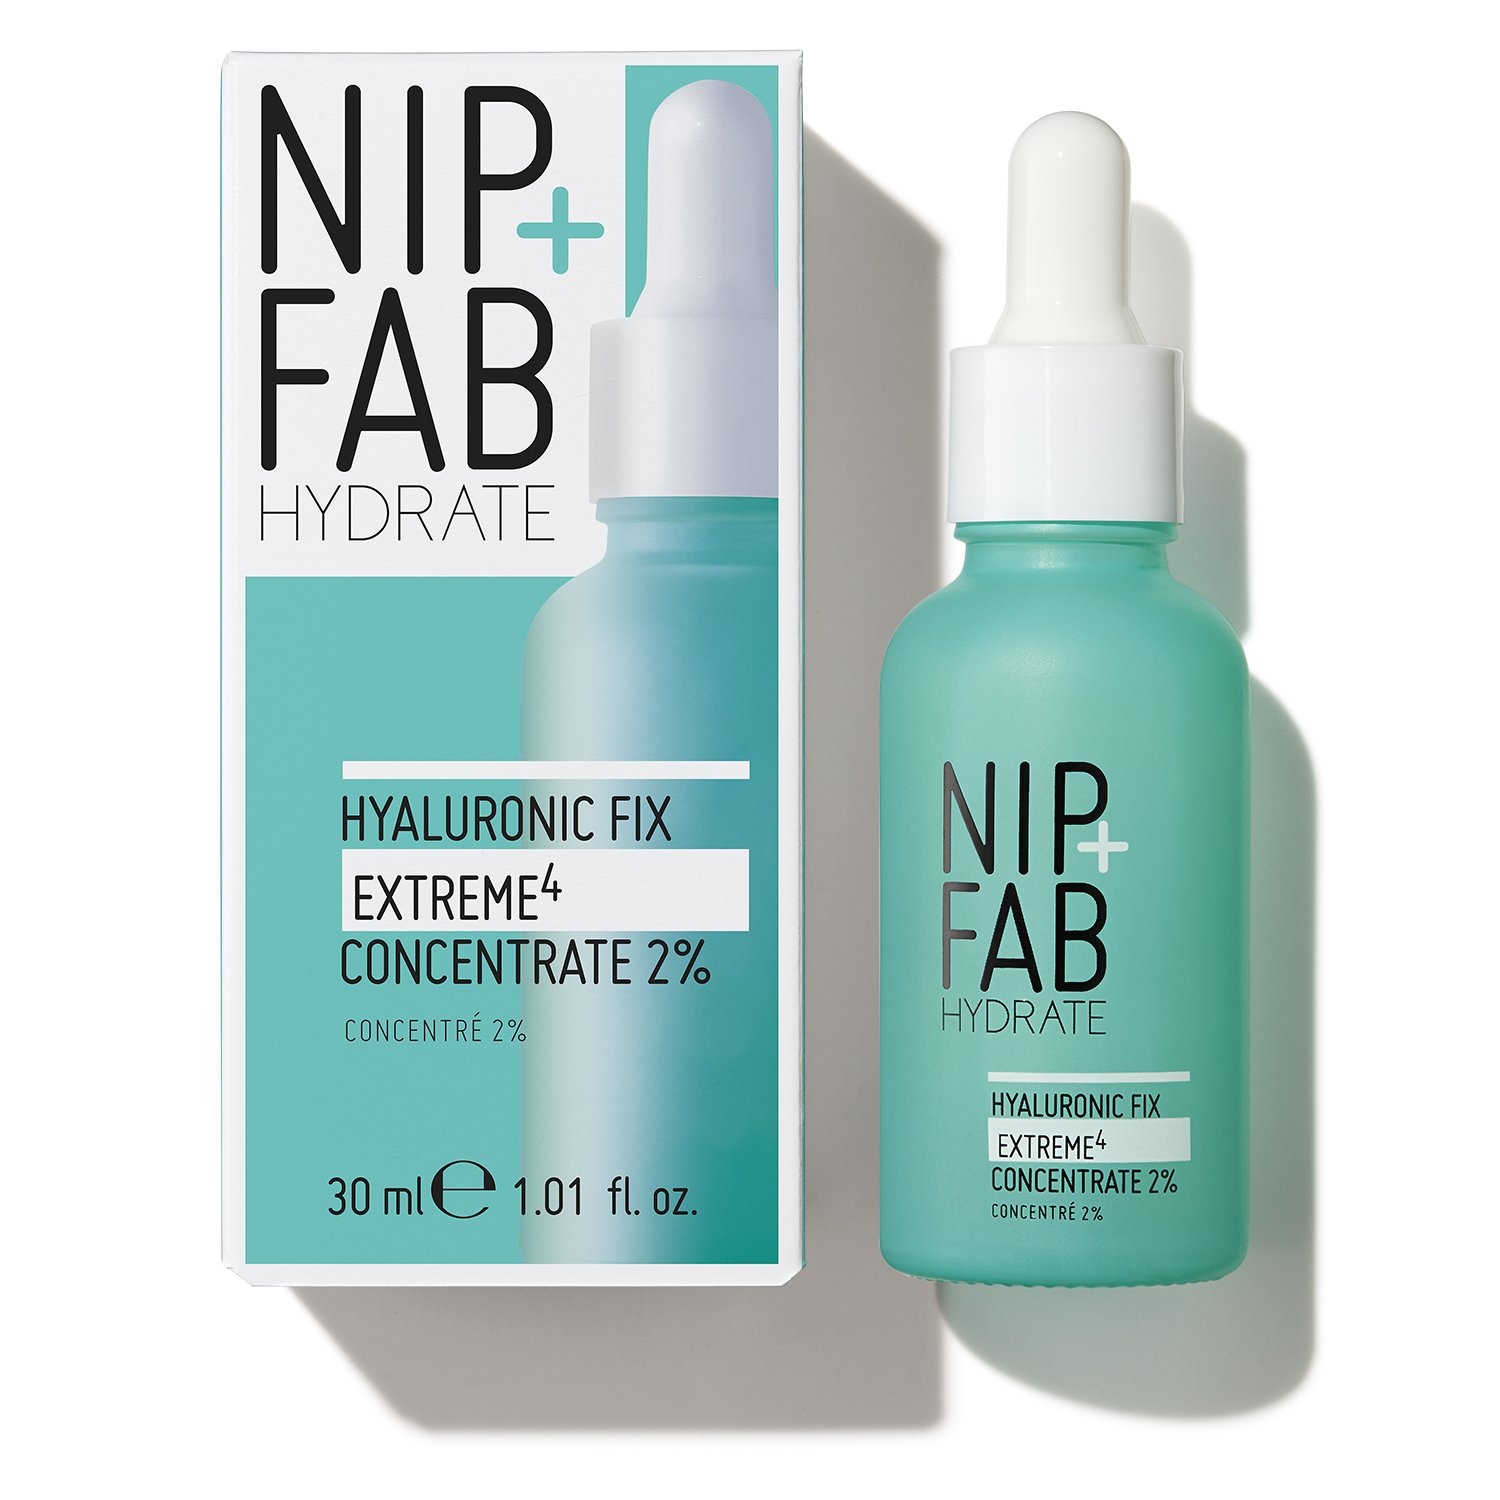 NIP+FAB Hyaluronic Fix Extreme4  2% Concentrate Extreme 30 ml